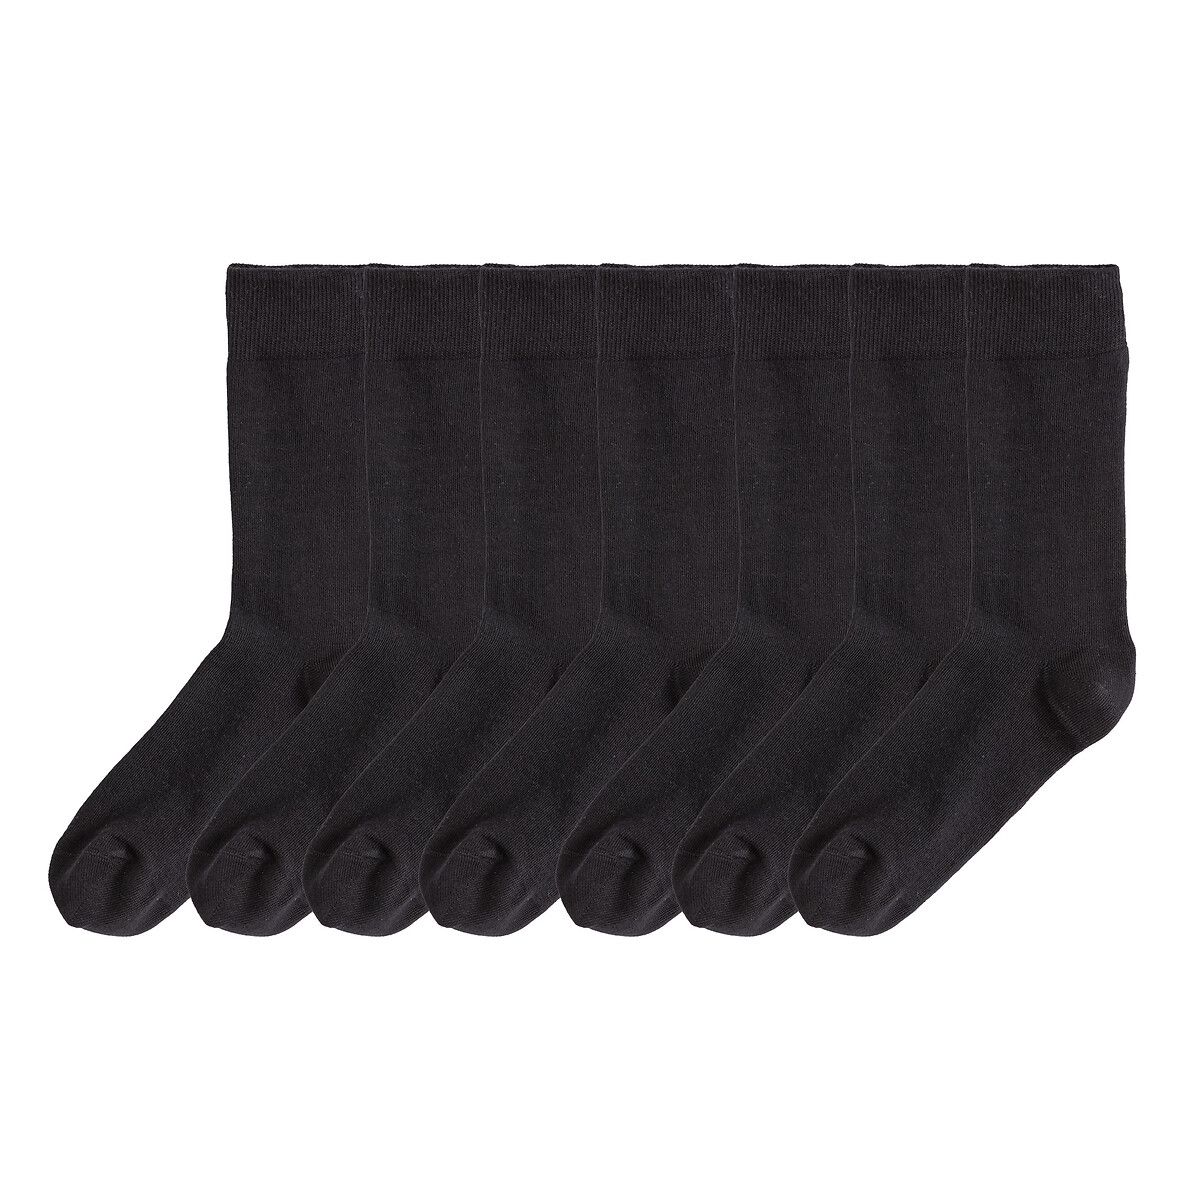 Pack of 7 Pairs of Socks in Cotton Mix, Made in Europe